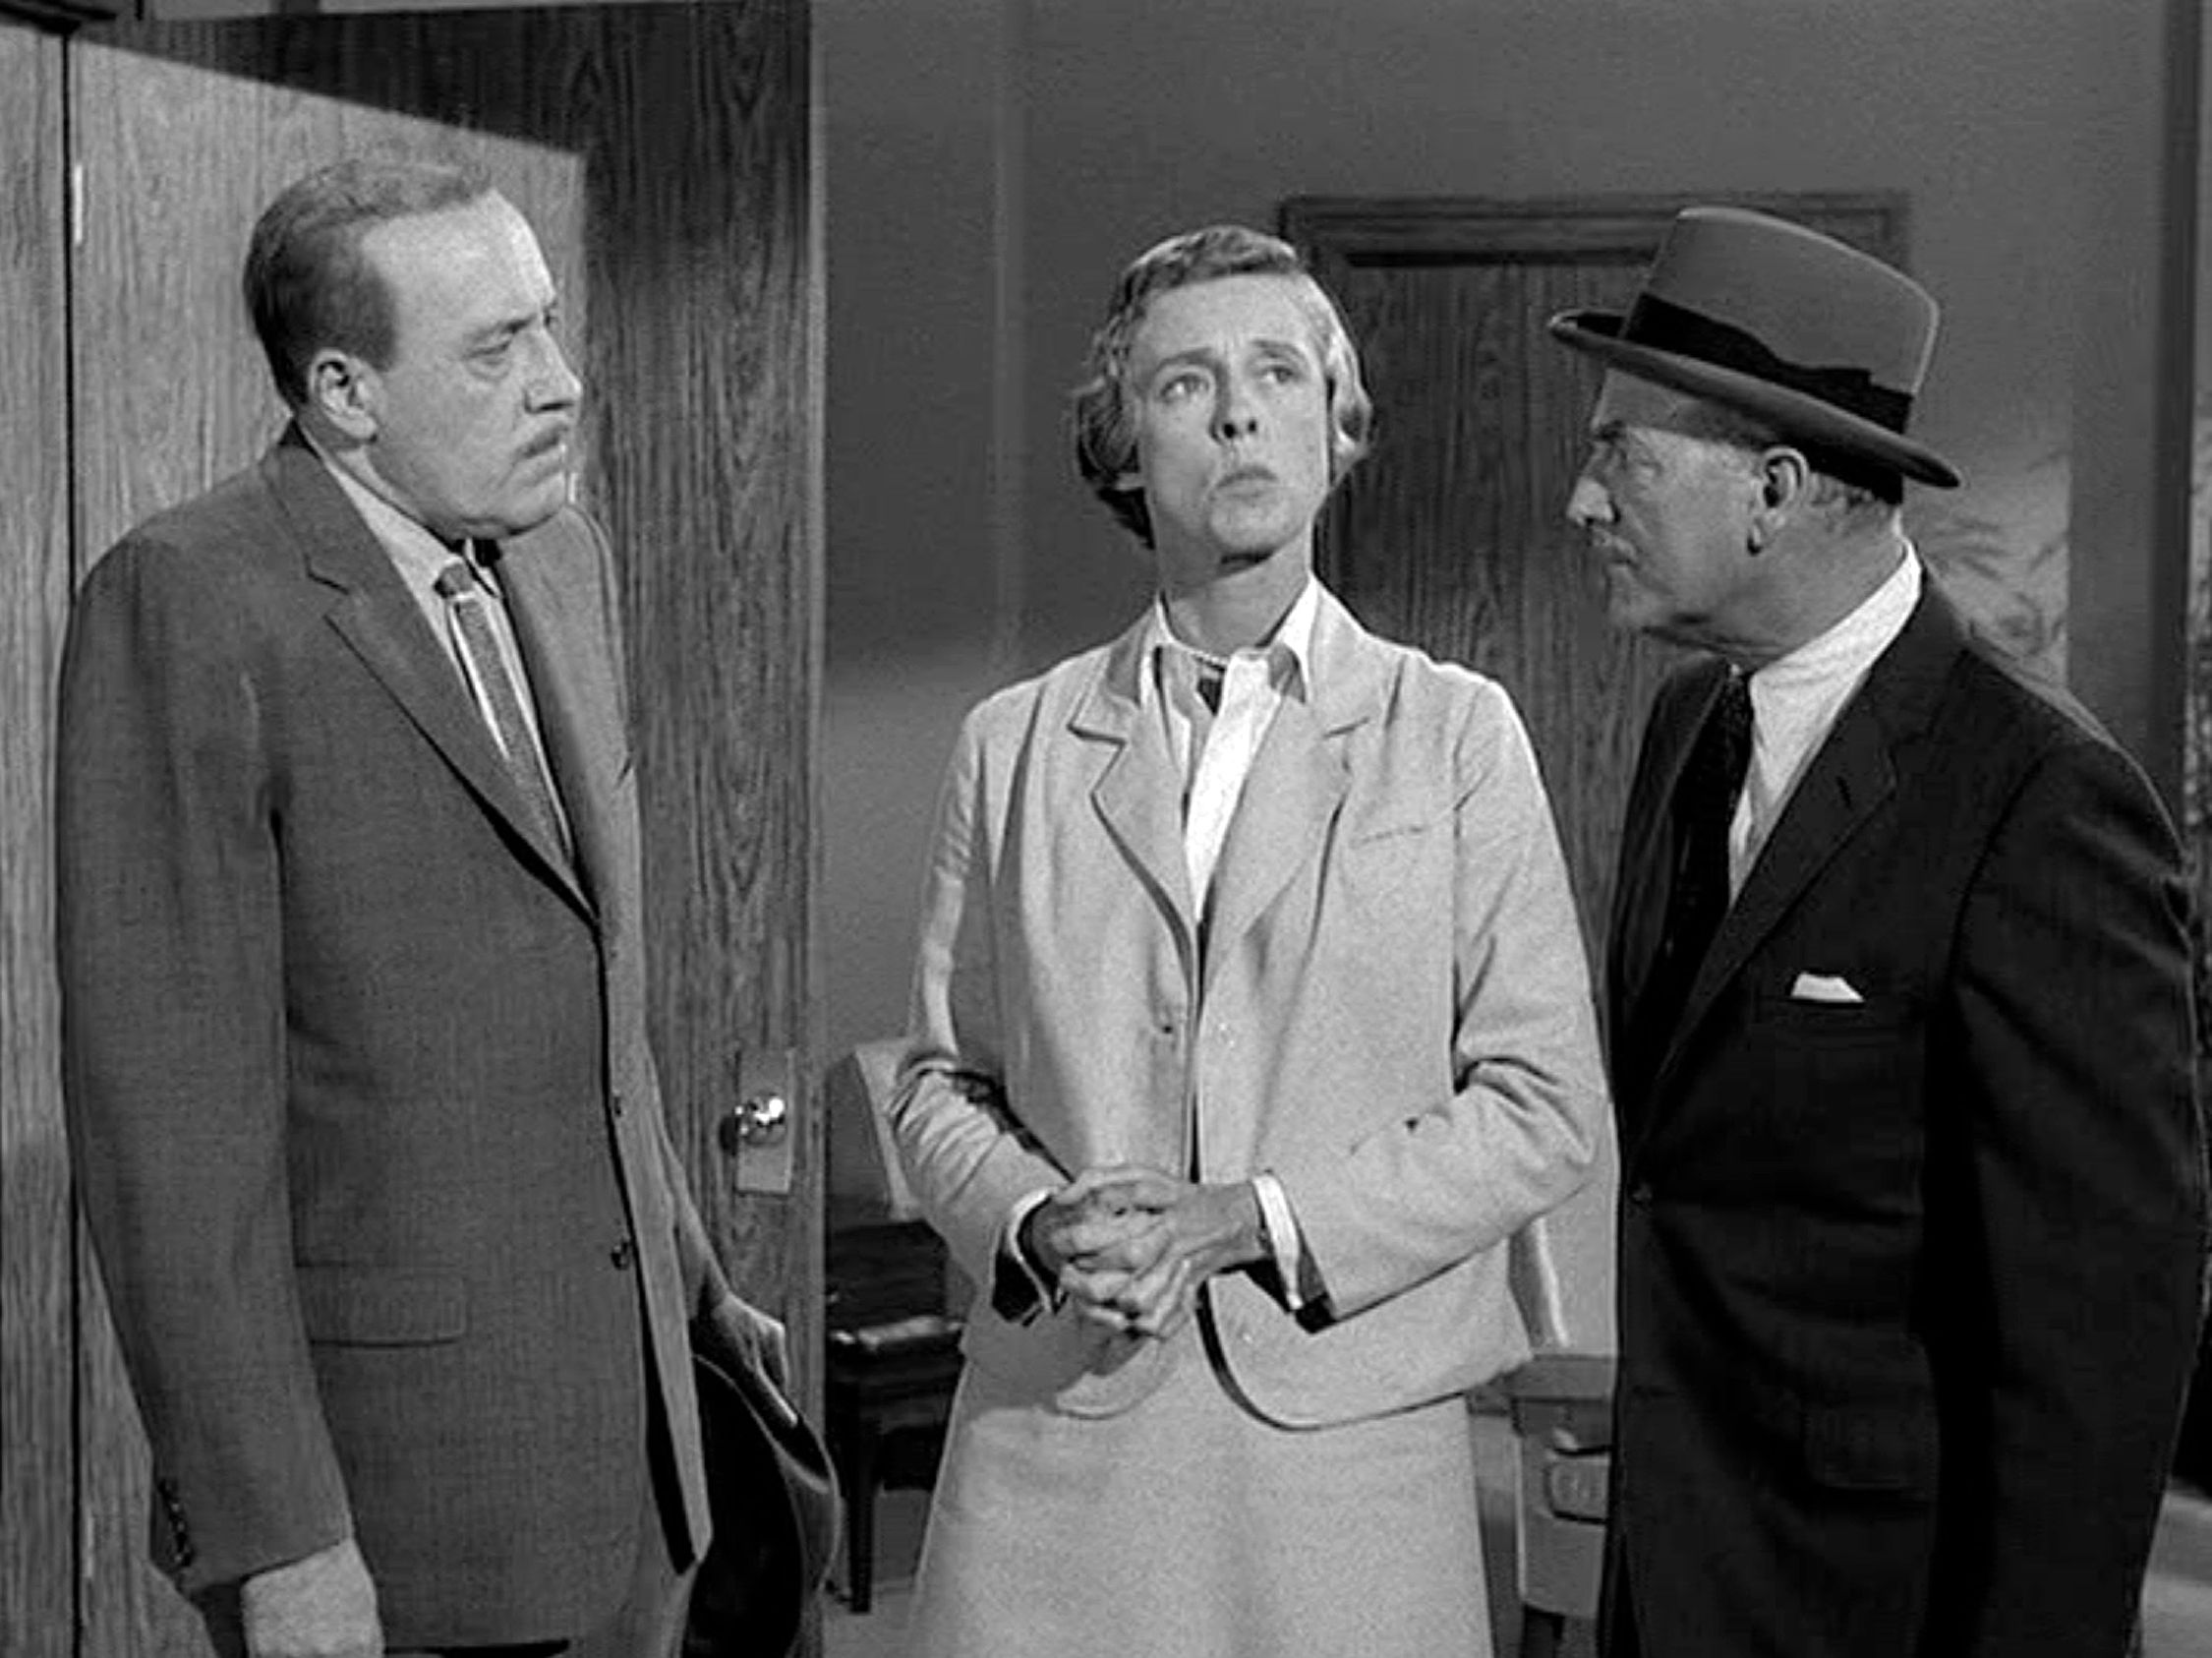 Fred Clark as Dr. Ray Clyburn, Nancy Kulp as Jane Hathaway and Raymond Bailey as Milburn Drysdale in "The Beverly Hillbillies," circa 1963. | Source: Getty Images